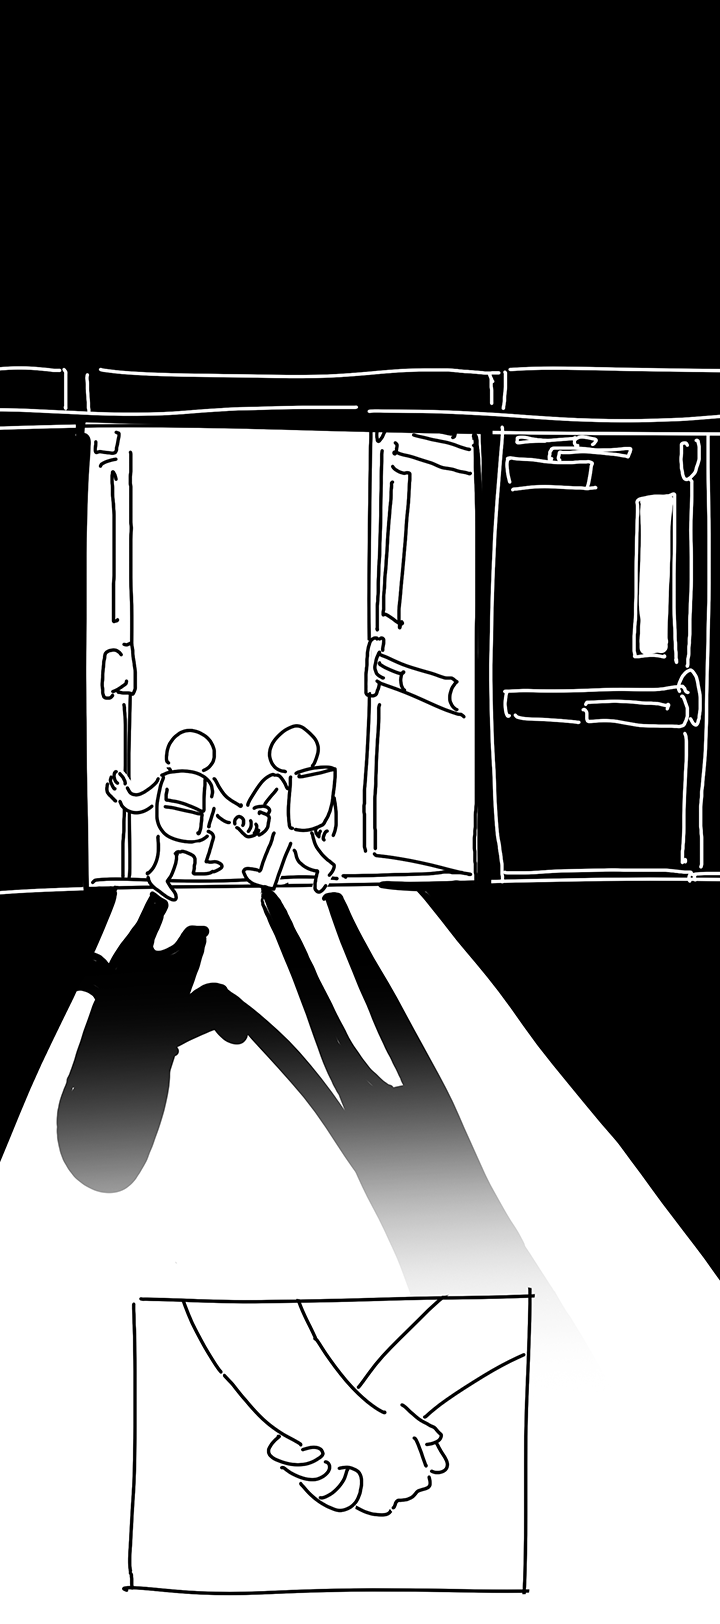 Panel 26: The kids walk out a set of large double doors with push bars that are way too big for them. They're holding hands. It's light outside and the two kids cast shadows behind them as they exit. The kid on the right's shadow extends much longer before it fades into white. Panel 27: A closer zoom of two hands holding each other.